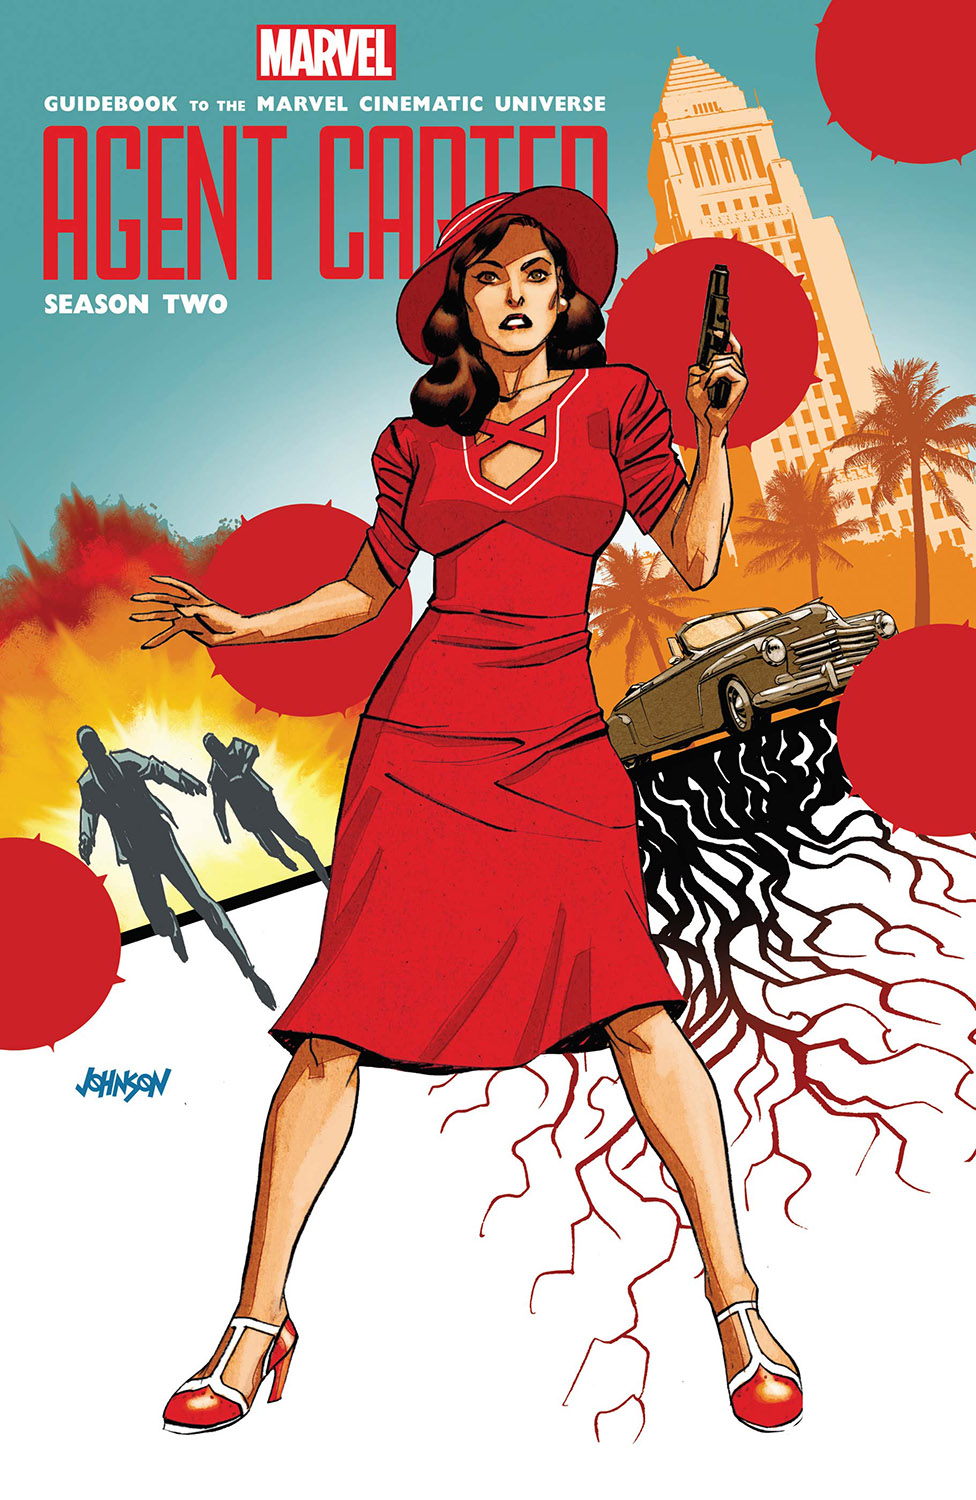 Guidebook to the Marvel Cinematic Universe - Agent Carter Season Two (2016)